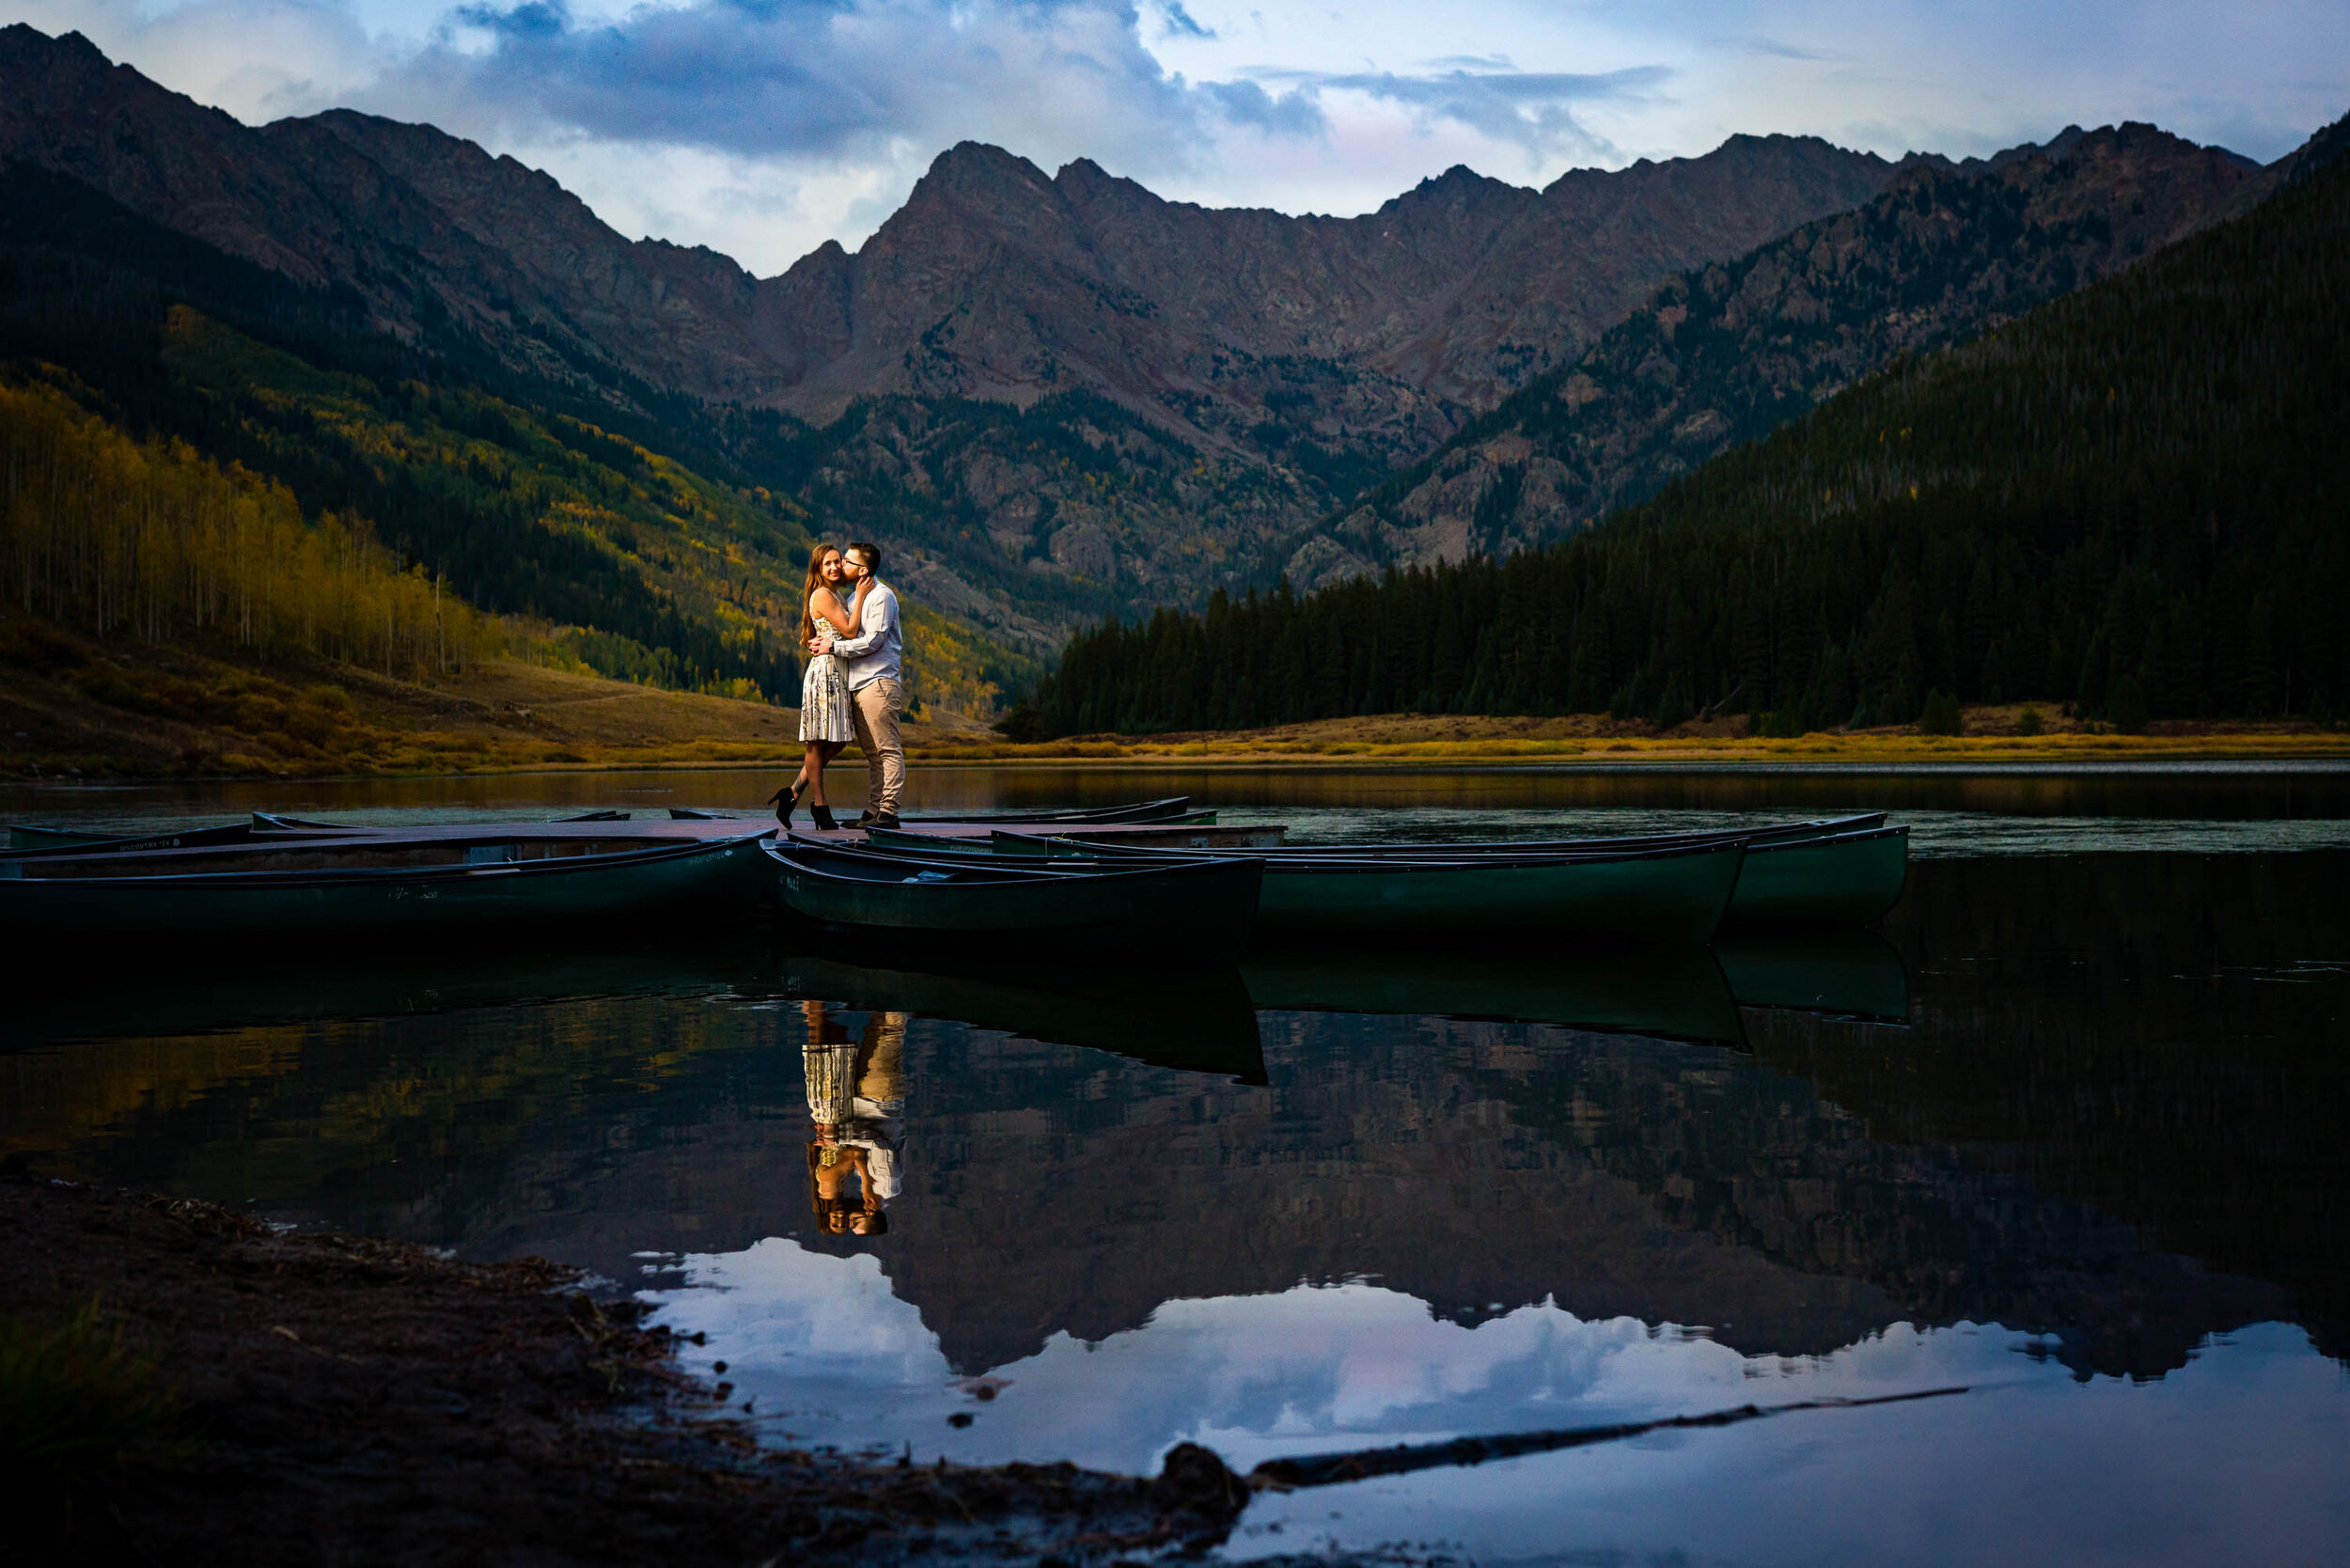 Engaged couple shares a kiss on the dock at blue hour surrounded by water with the mountains in the background, Engagement Session, Engagement Photos, Engagement Photos Inspiration, Engagement Photography, Engagement Photographer, Fall Engagement Photos, Mountain Engagement Photos, Piney River Ranch engagement photos, Vail engagement session, Vail engagement photos, Vail engagement photography, Vail engagement photographer, Vail engagement inspiration, Colorado engagement session, Colorado engagement photos, Colorado engagement photography, Colorado engagement photographer, Colorado engagement inspiration